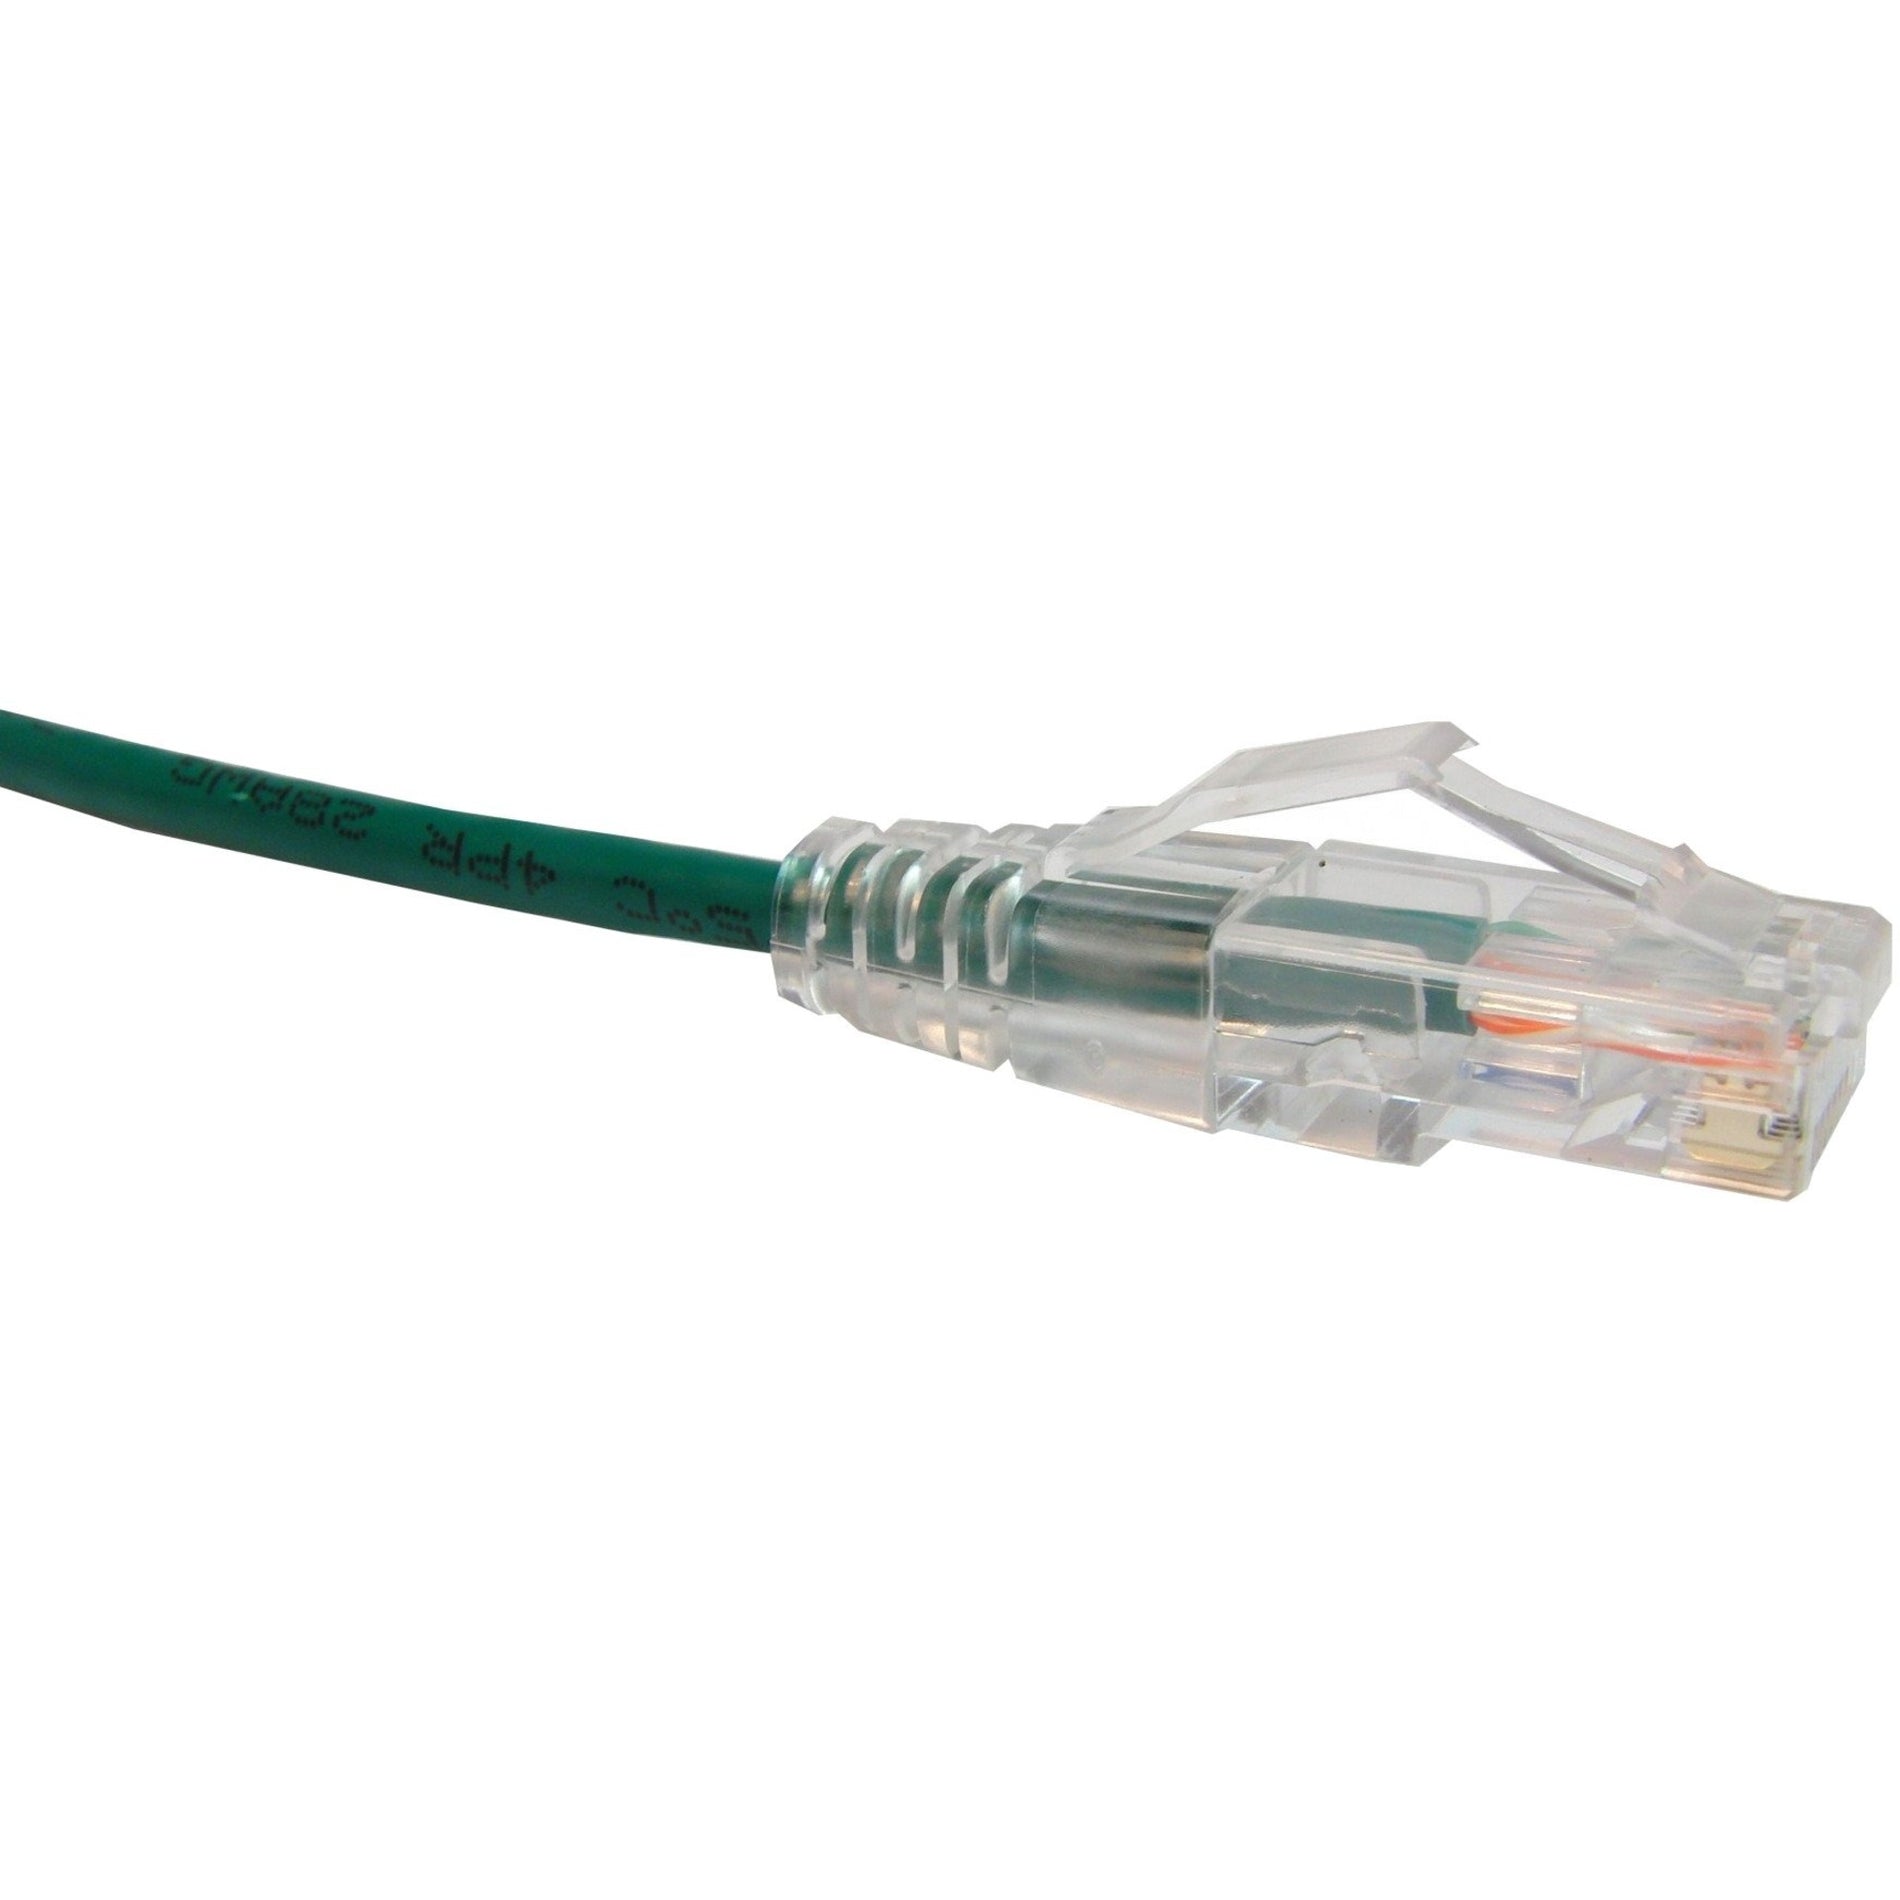 Unirise CS6-05F-GRN Clearfit Slim Cat6 Patch Cable, Green, 5ft